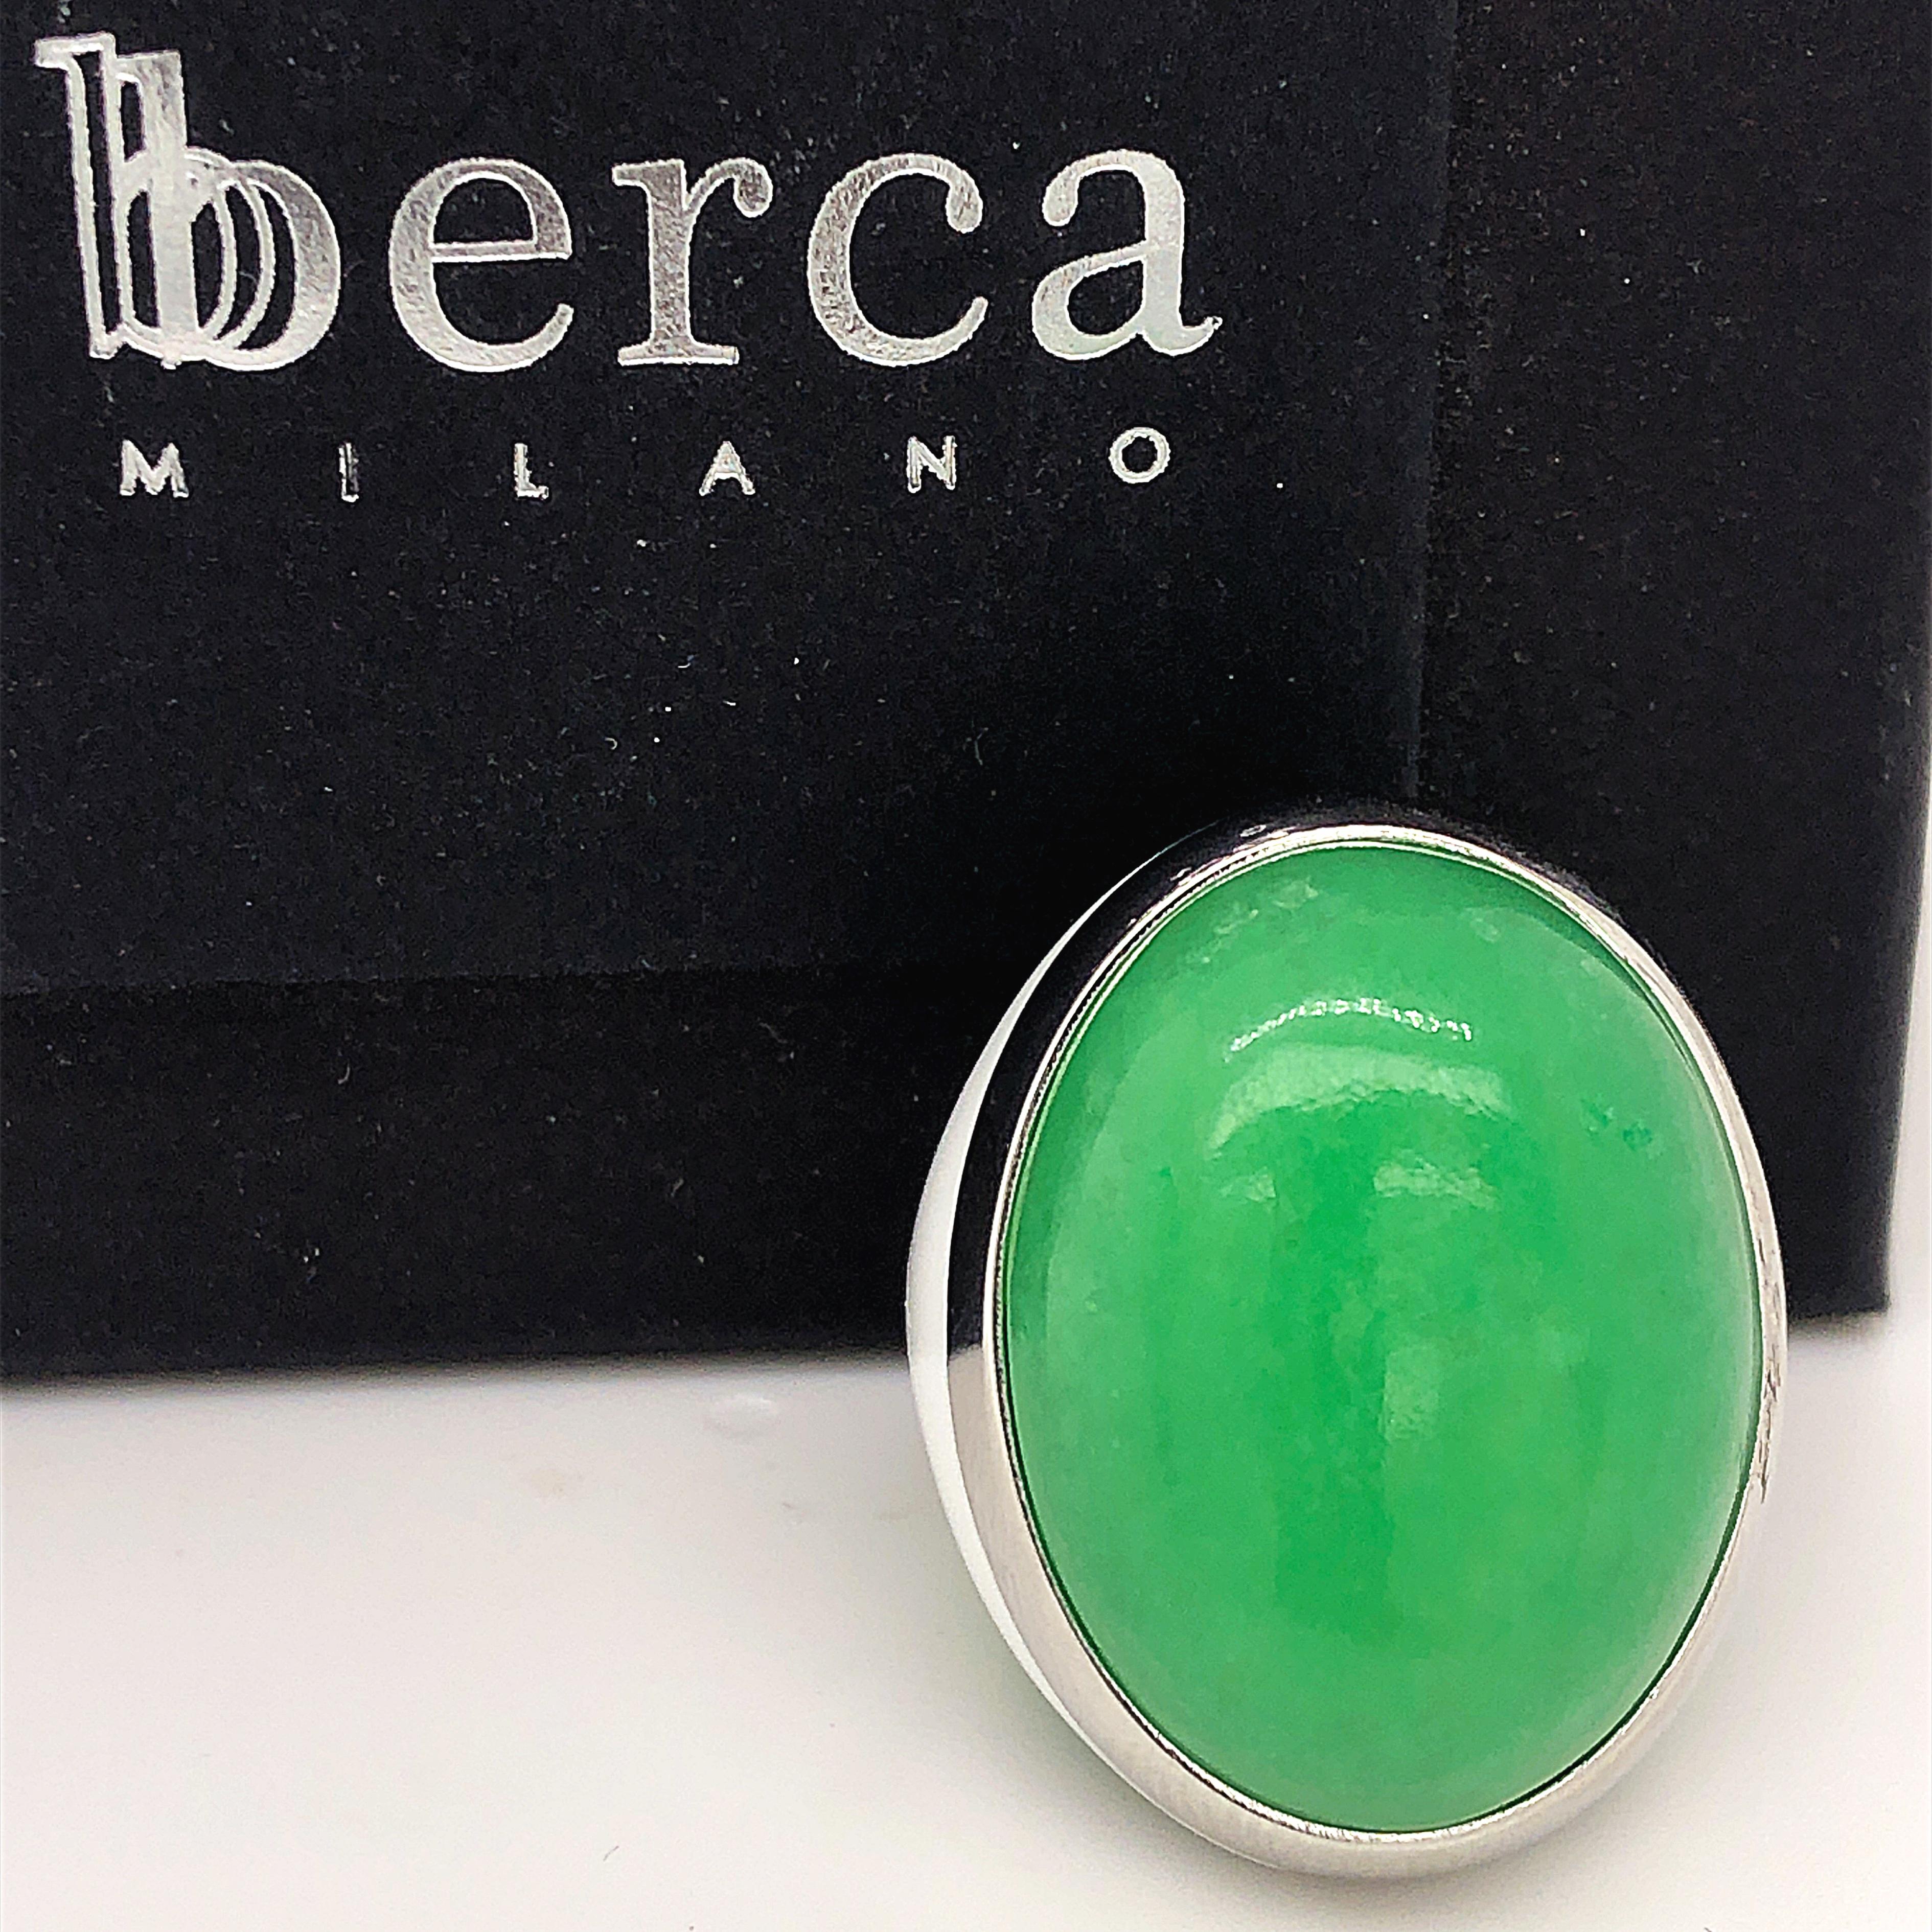 Oval Cut Berca 21.2 Kt Green Jade White Hand Enameled Sterling Silver Cocktail Ring